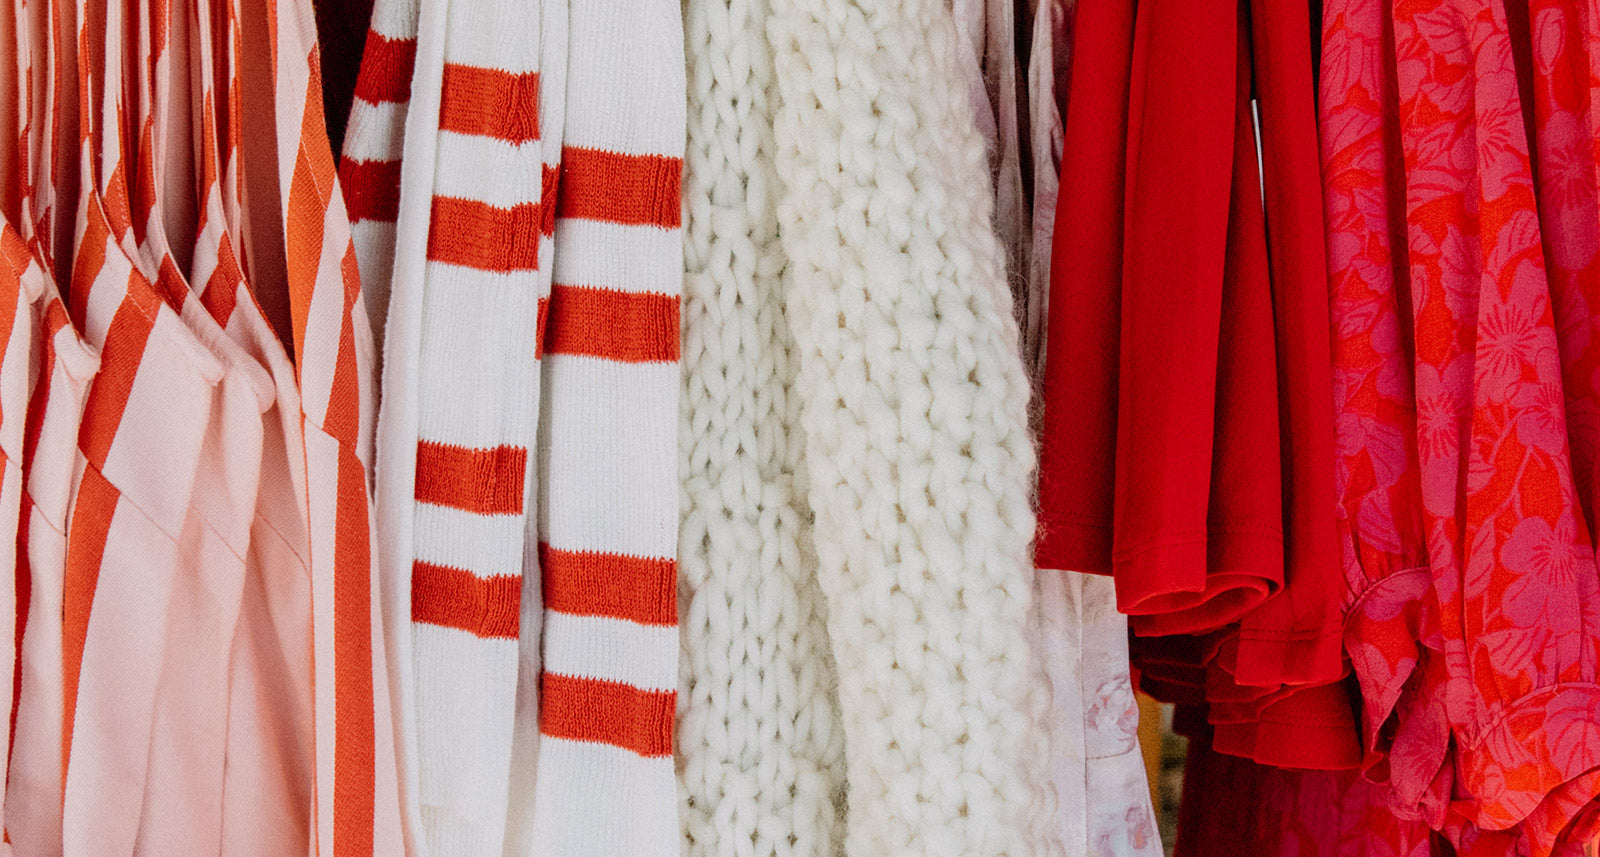 5 Ways to Recycle Your Closet